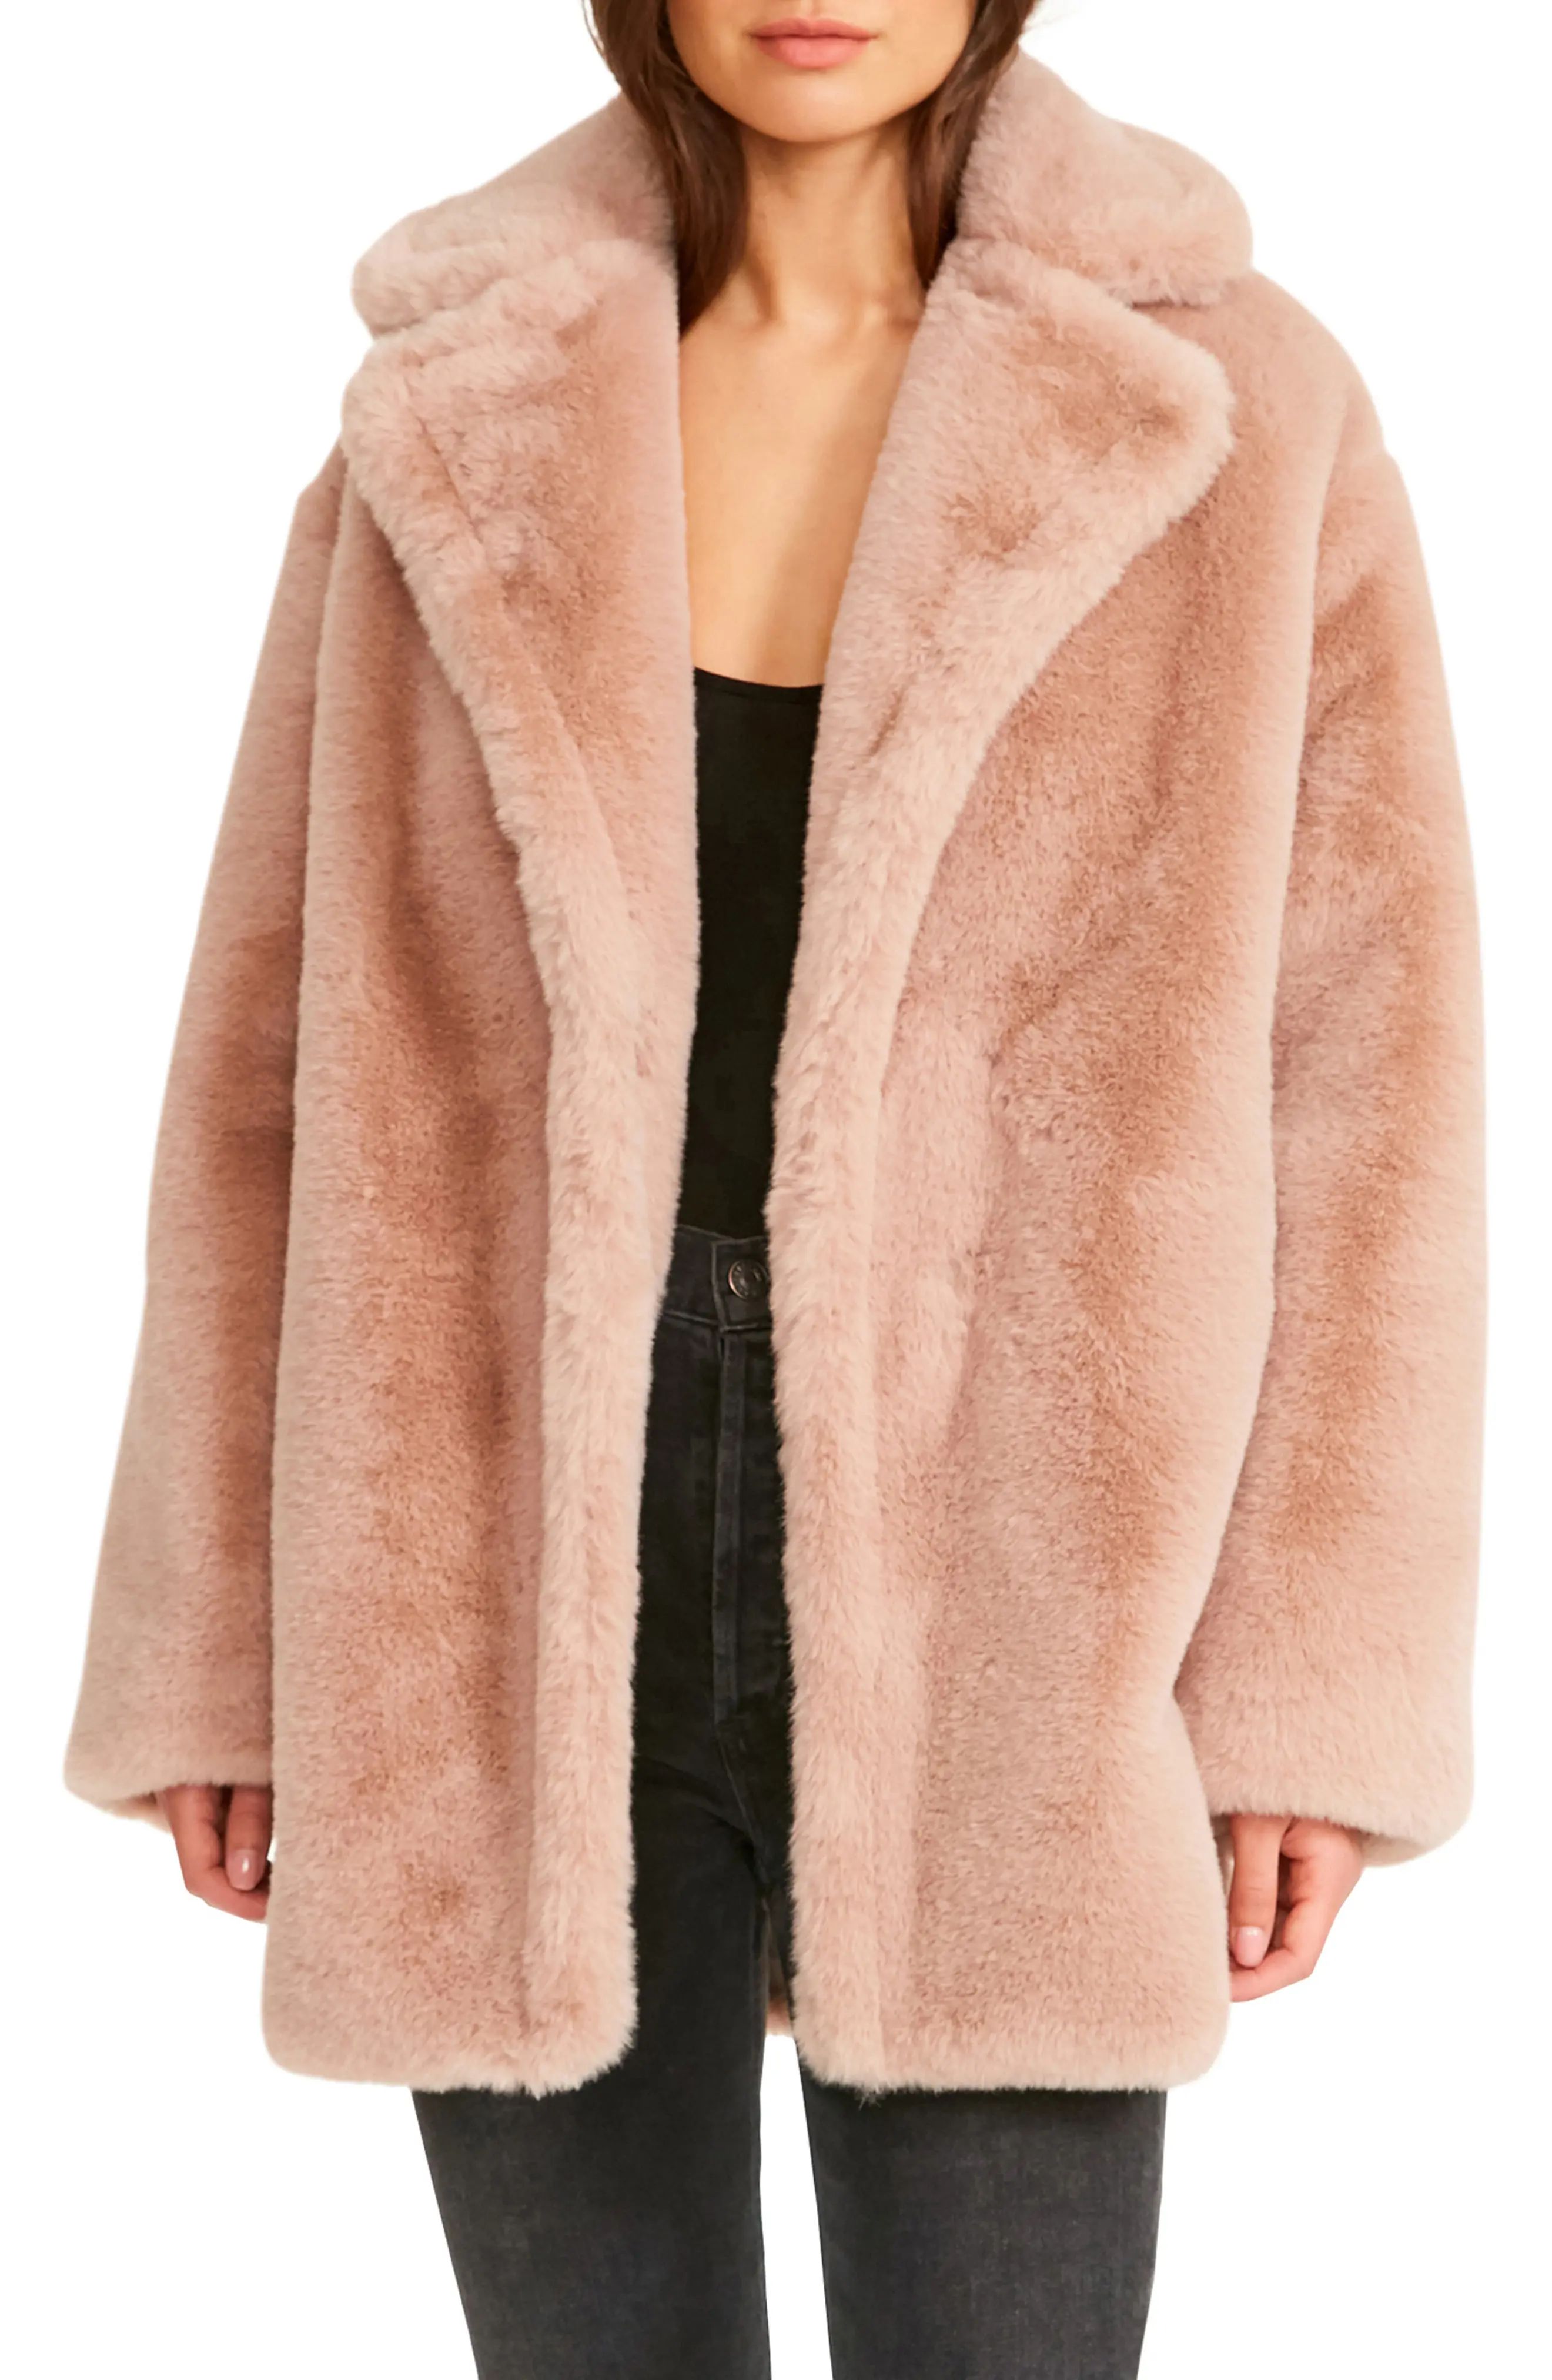 BB Dakota by Steve Madden Plush Hour Faux Fur Jacket in Light Taupe at Nordstrom, Size Small | Nordstrom